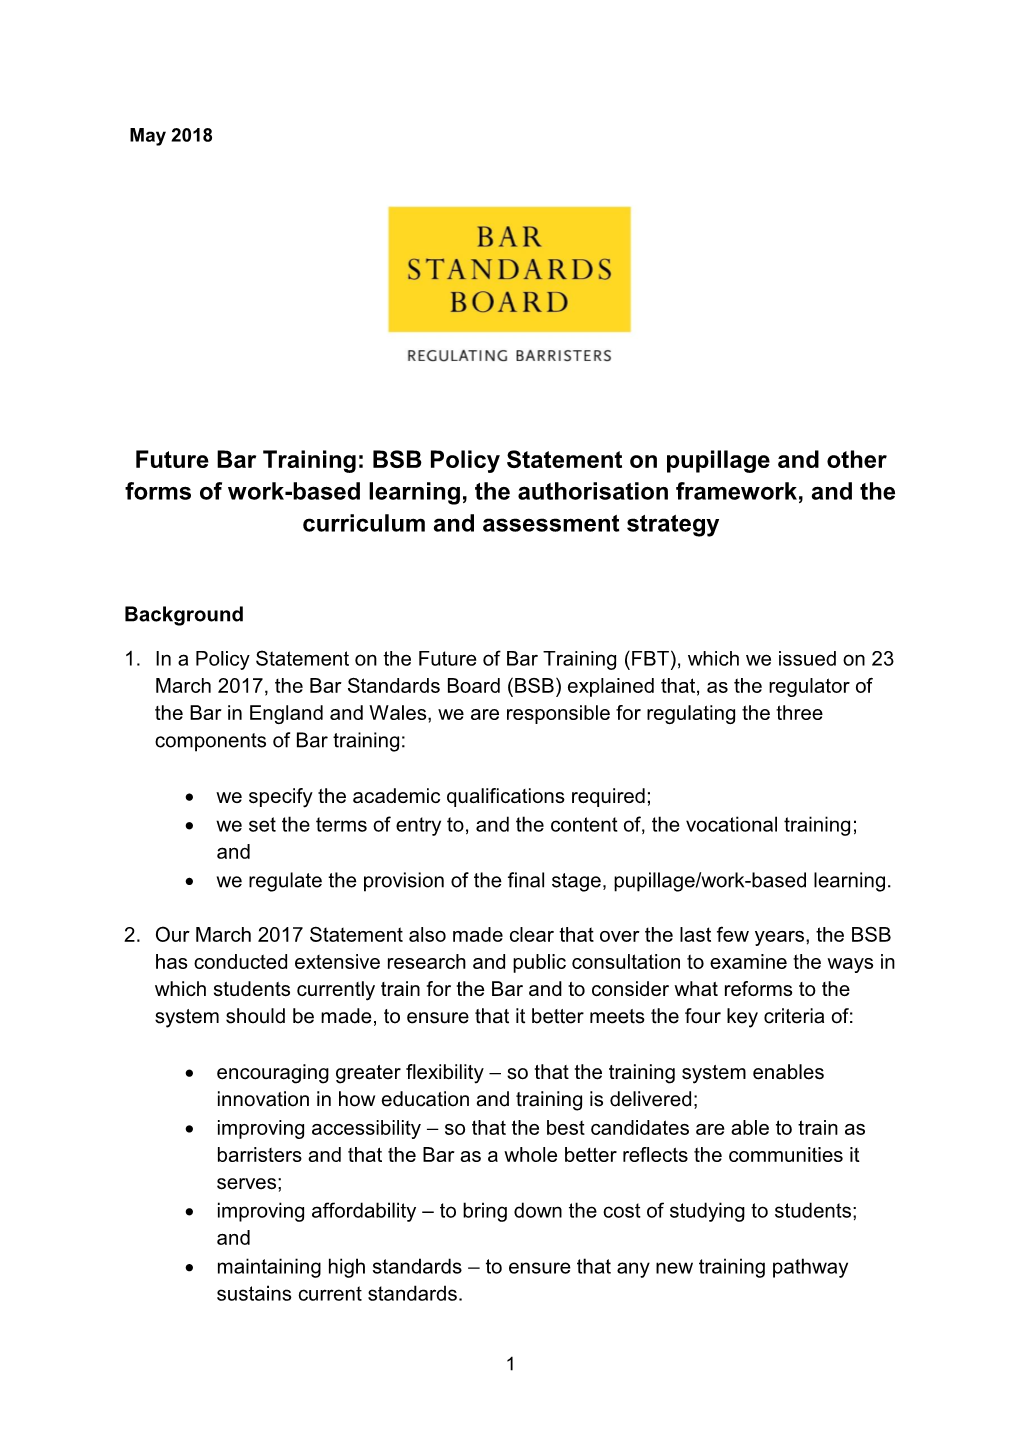 Future Bar Training: BSB Policy Statement on Pupillage and Other